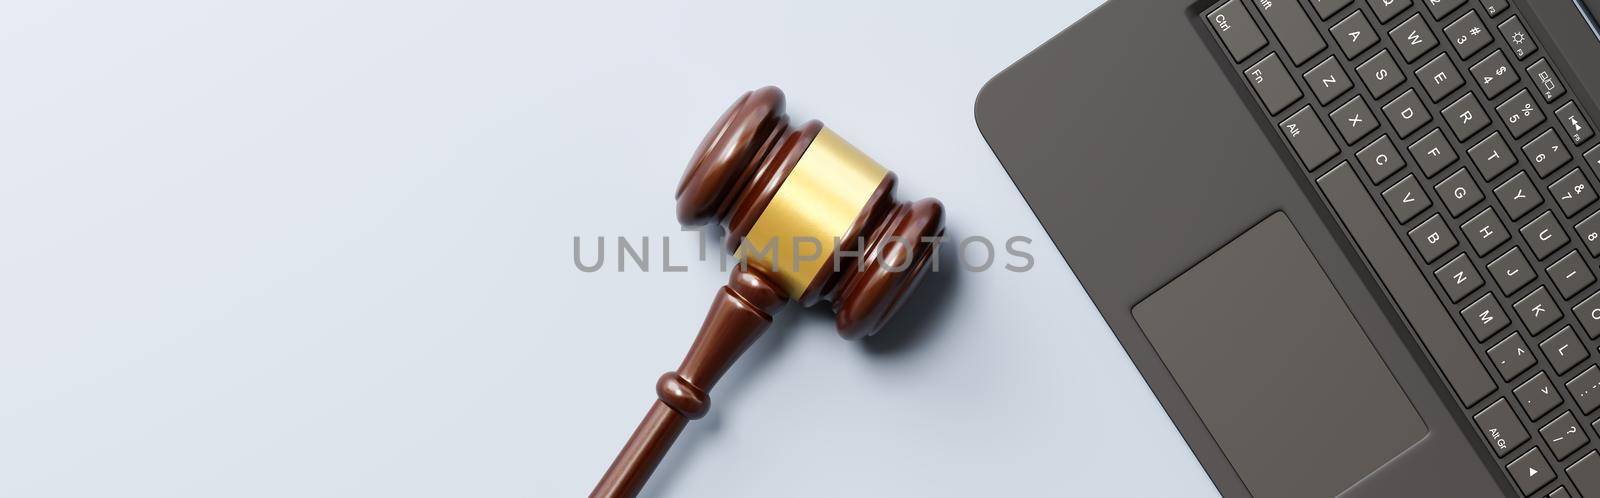 Judge's Gavel and Laptop Computer on Gray Background with Copy Space 3D Render Illustration, Digital Rights Concept